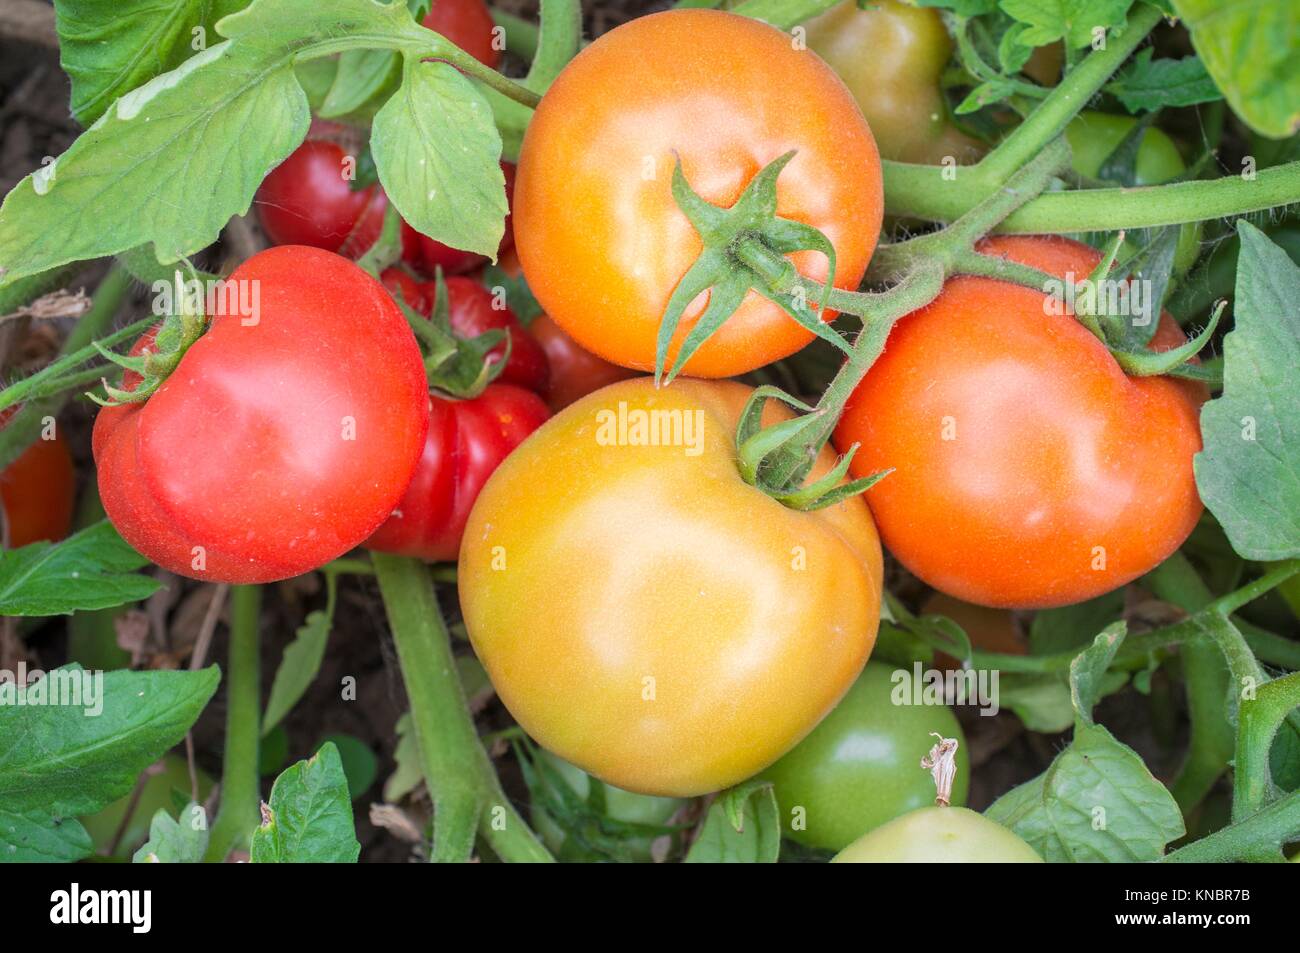 Tomatoes on plant at local farm with different maturation stage. Sustainable agriculture production. Stock Photo